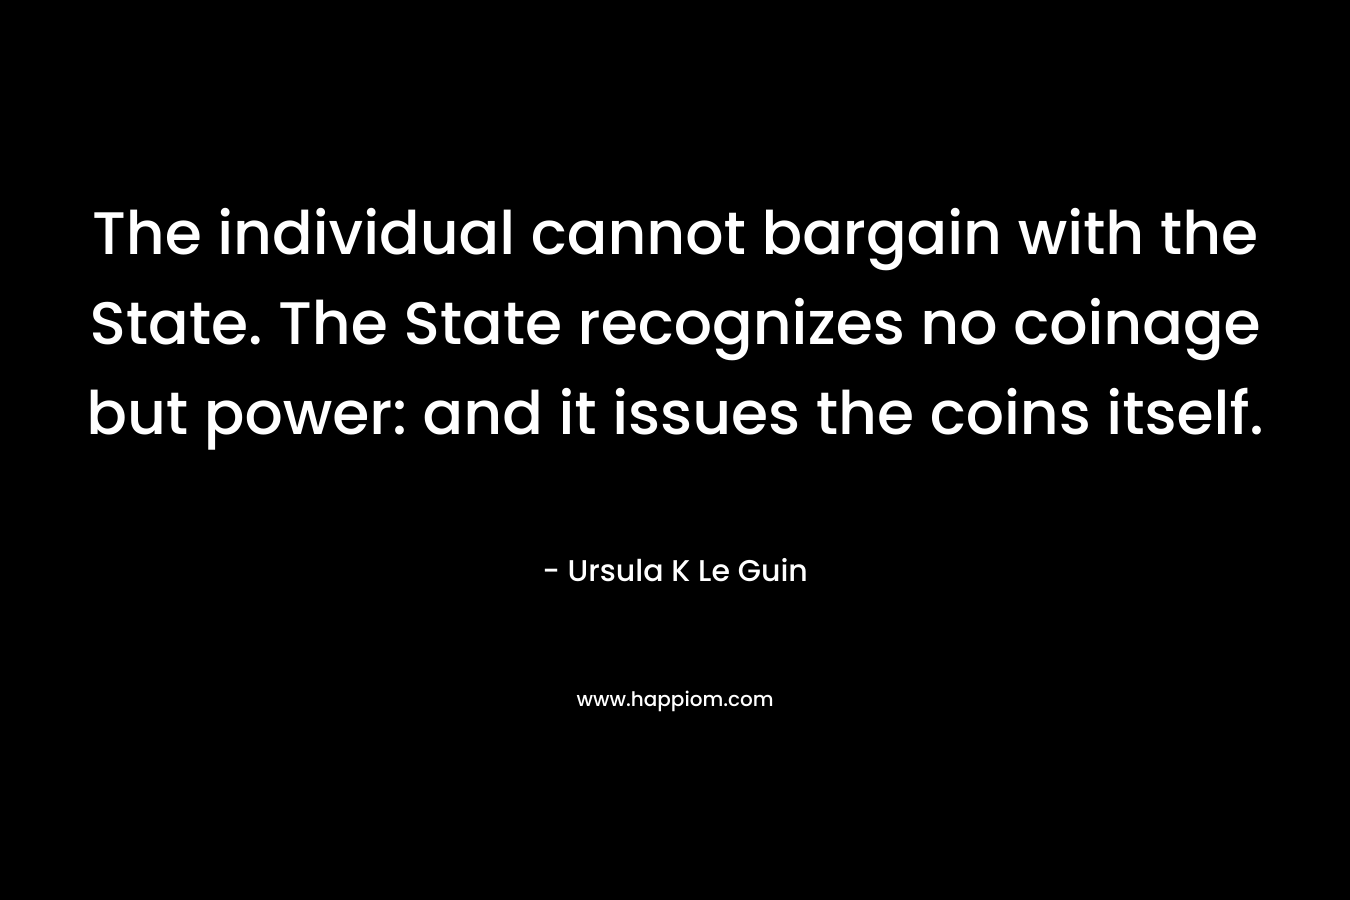 The individual cannot bargain with the State. The State recognizes no coinage but power: and it issues the coins itself. – Ursula K Le Guin